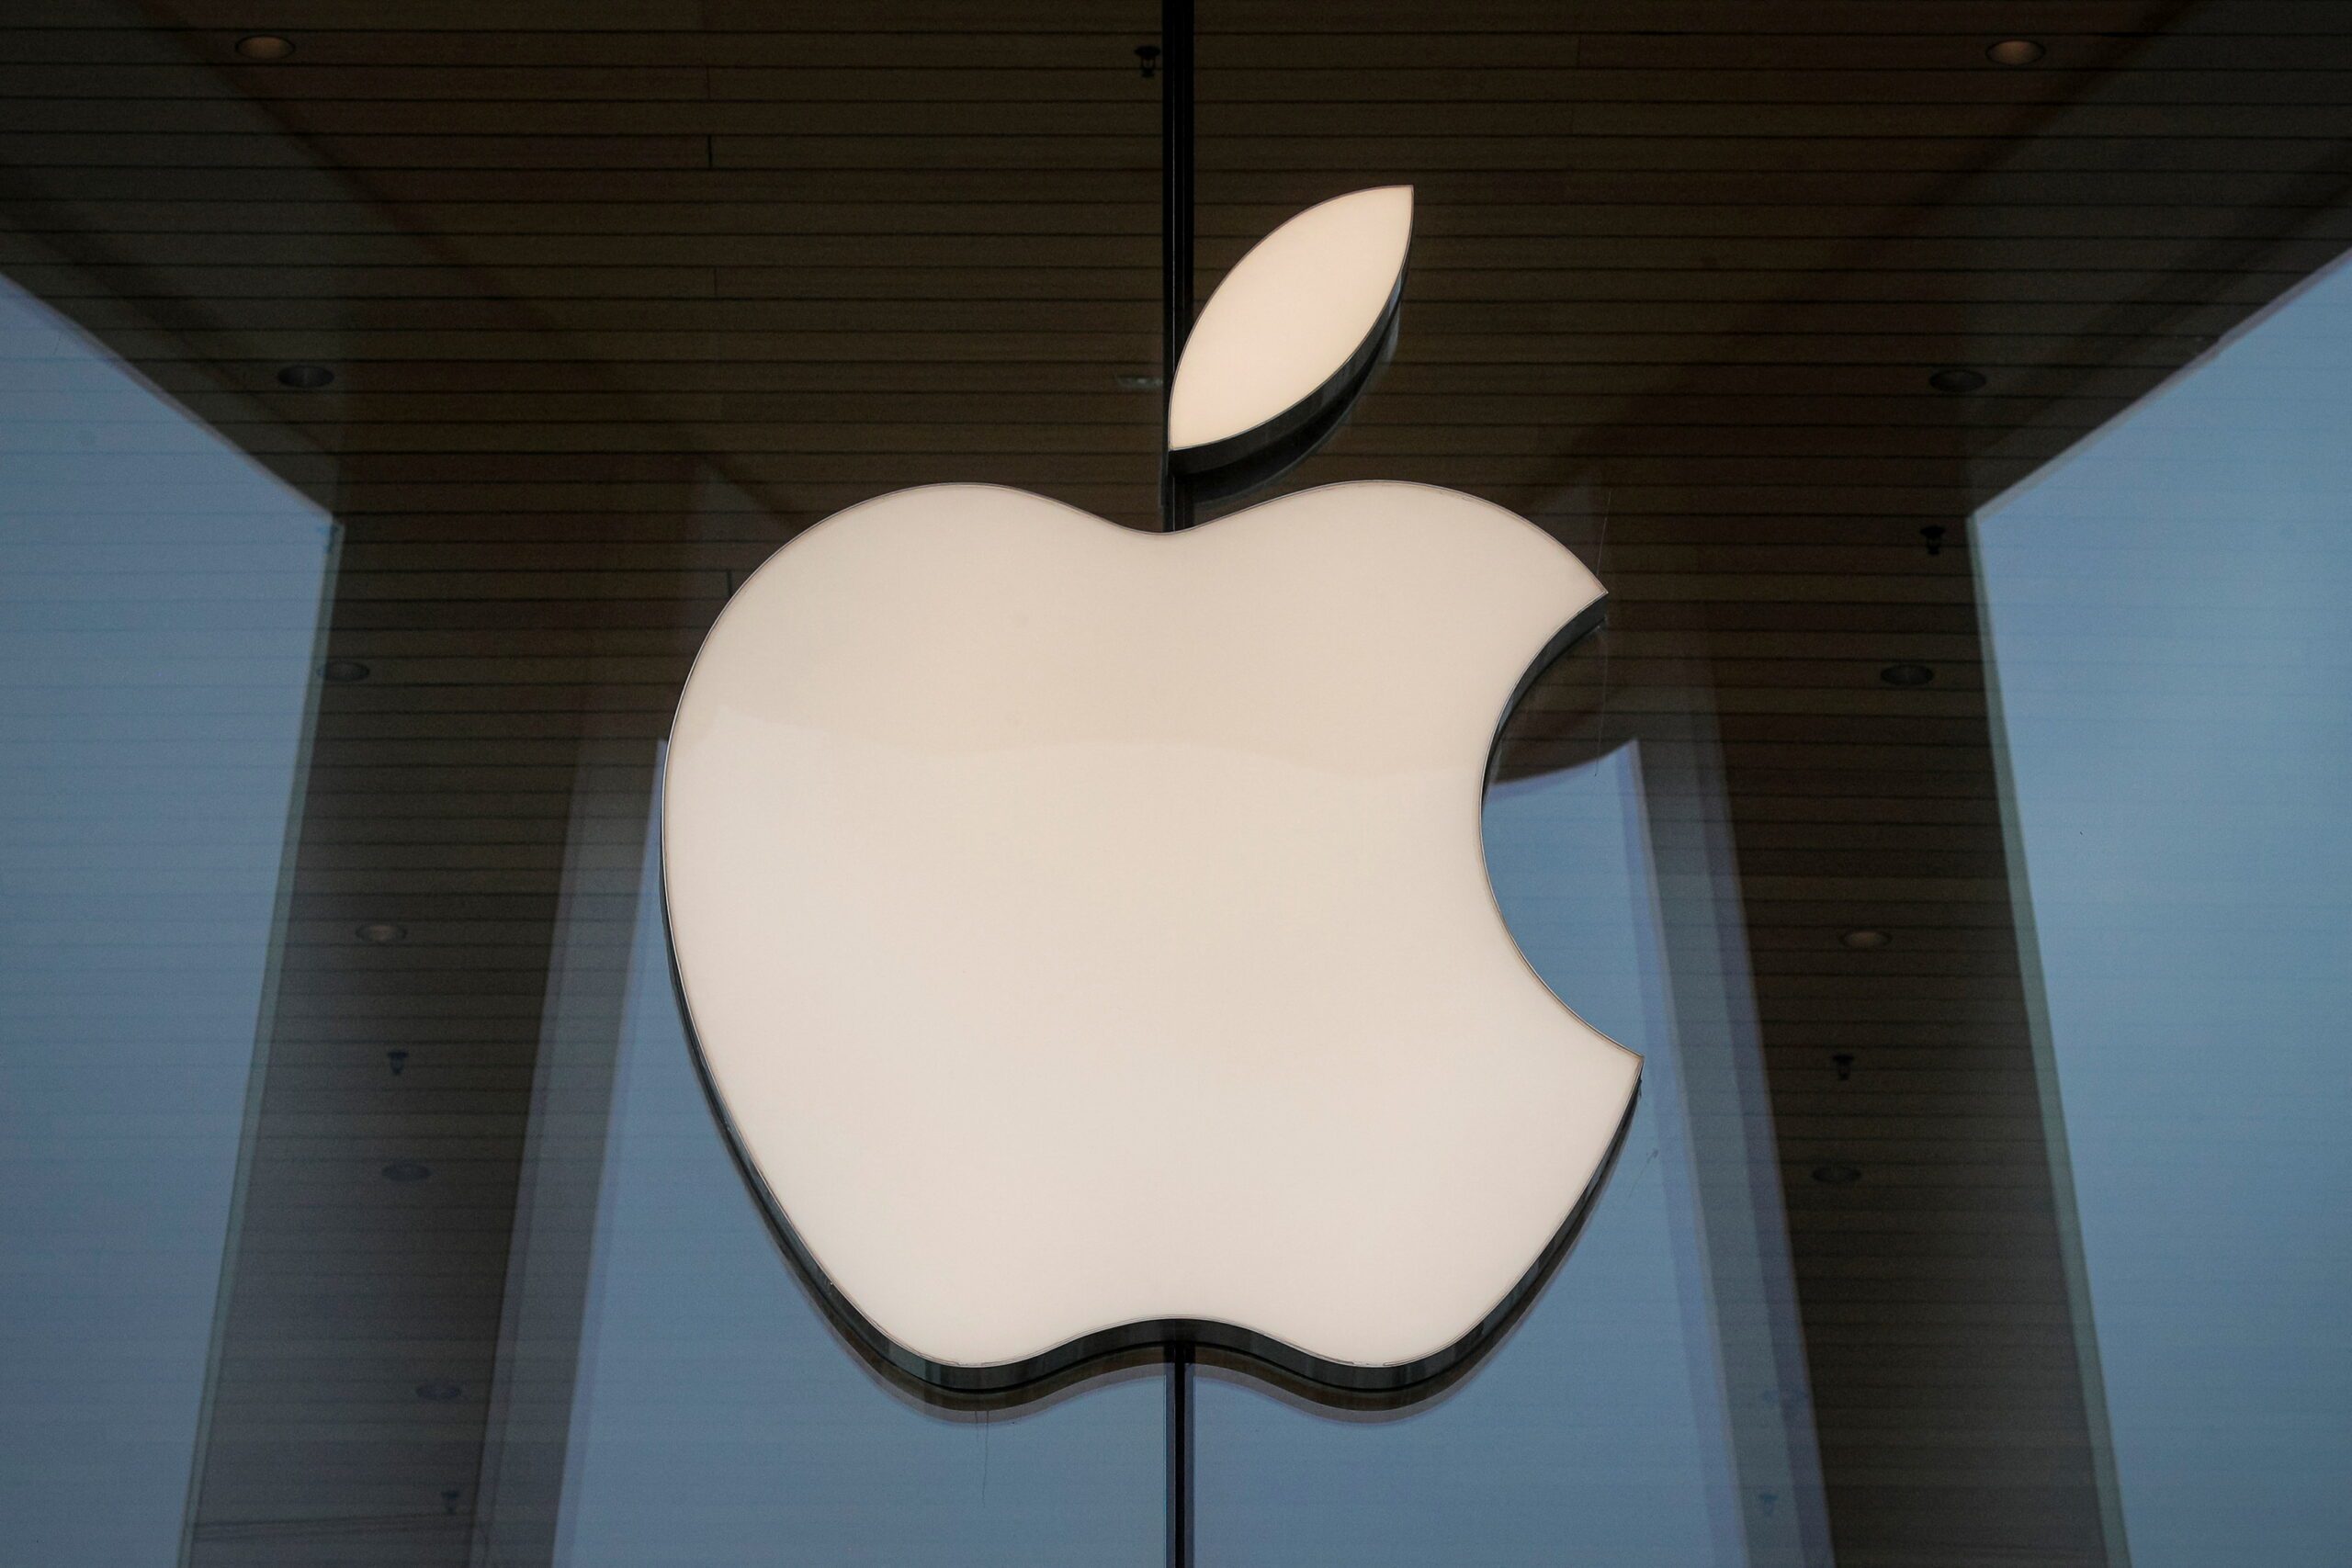 Apple to increase starting pay for US workers